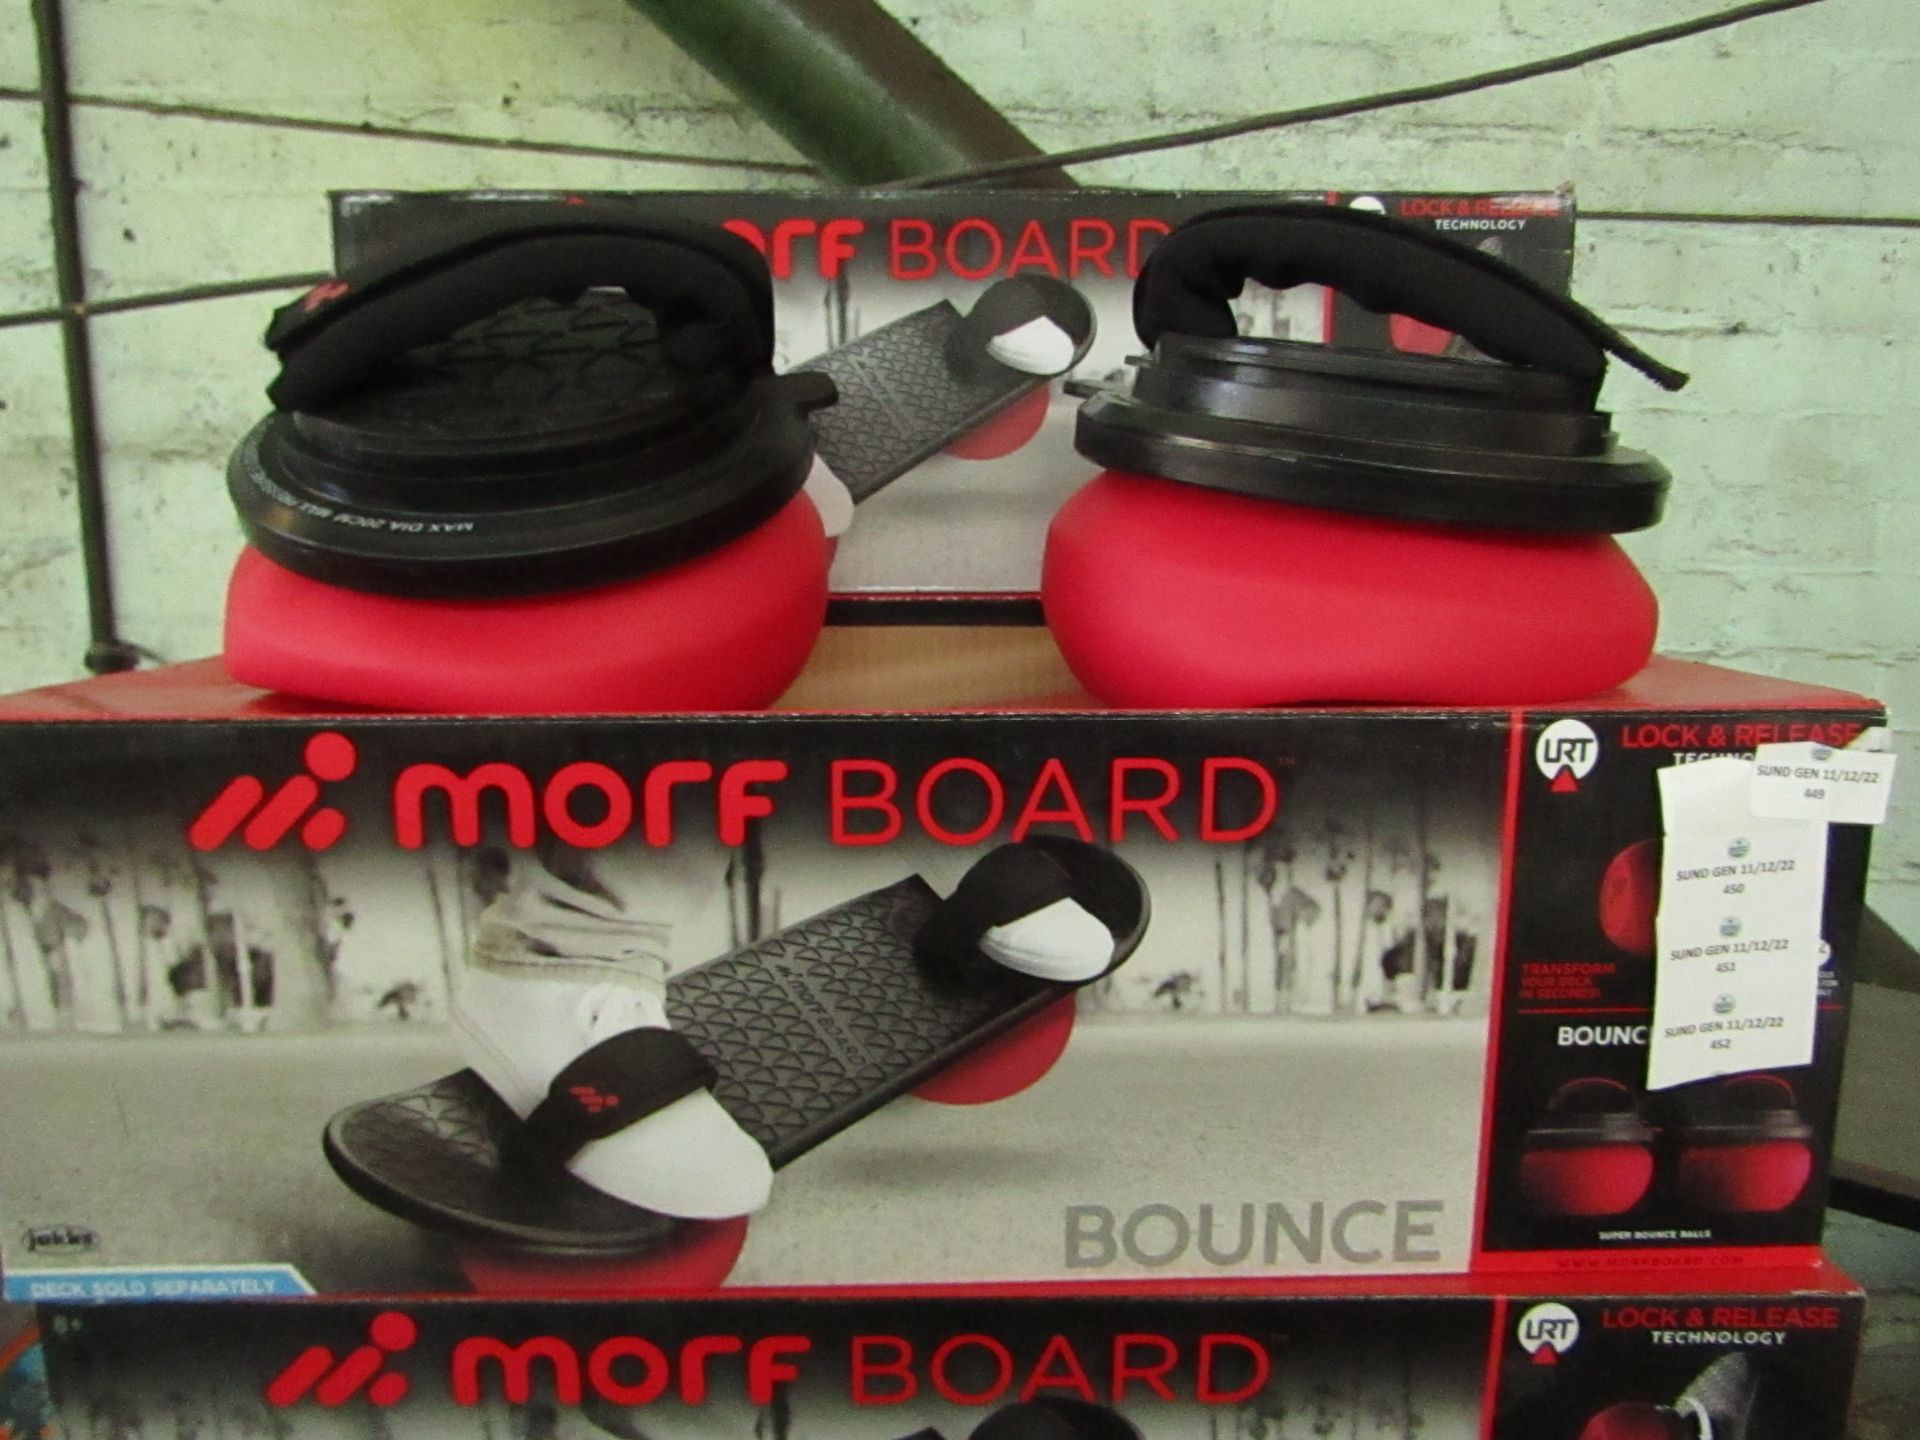 2x Murf Board - Bounce Xtension Super Bounce Balls ( Deck Sold Separately ) - Unchecked & Boxed.